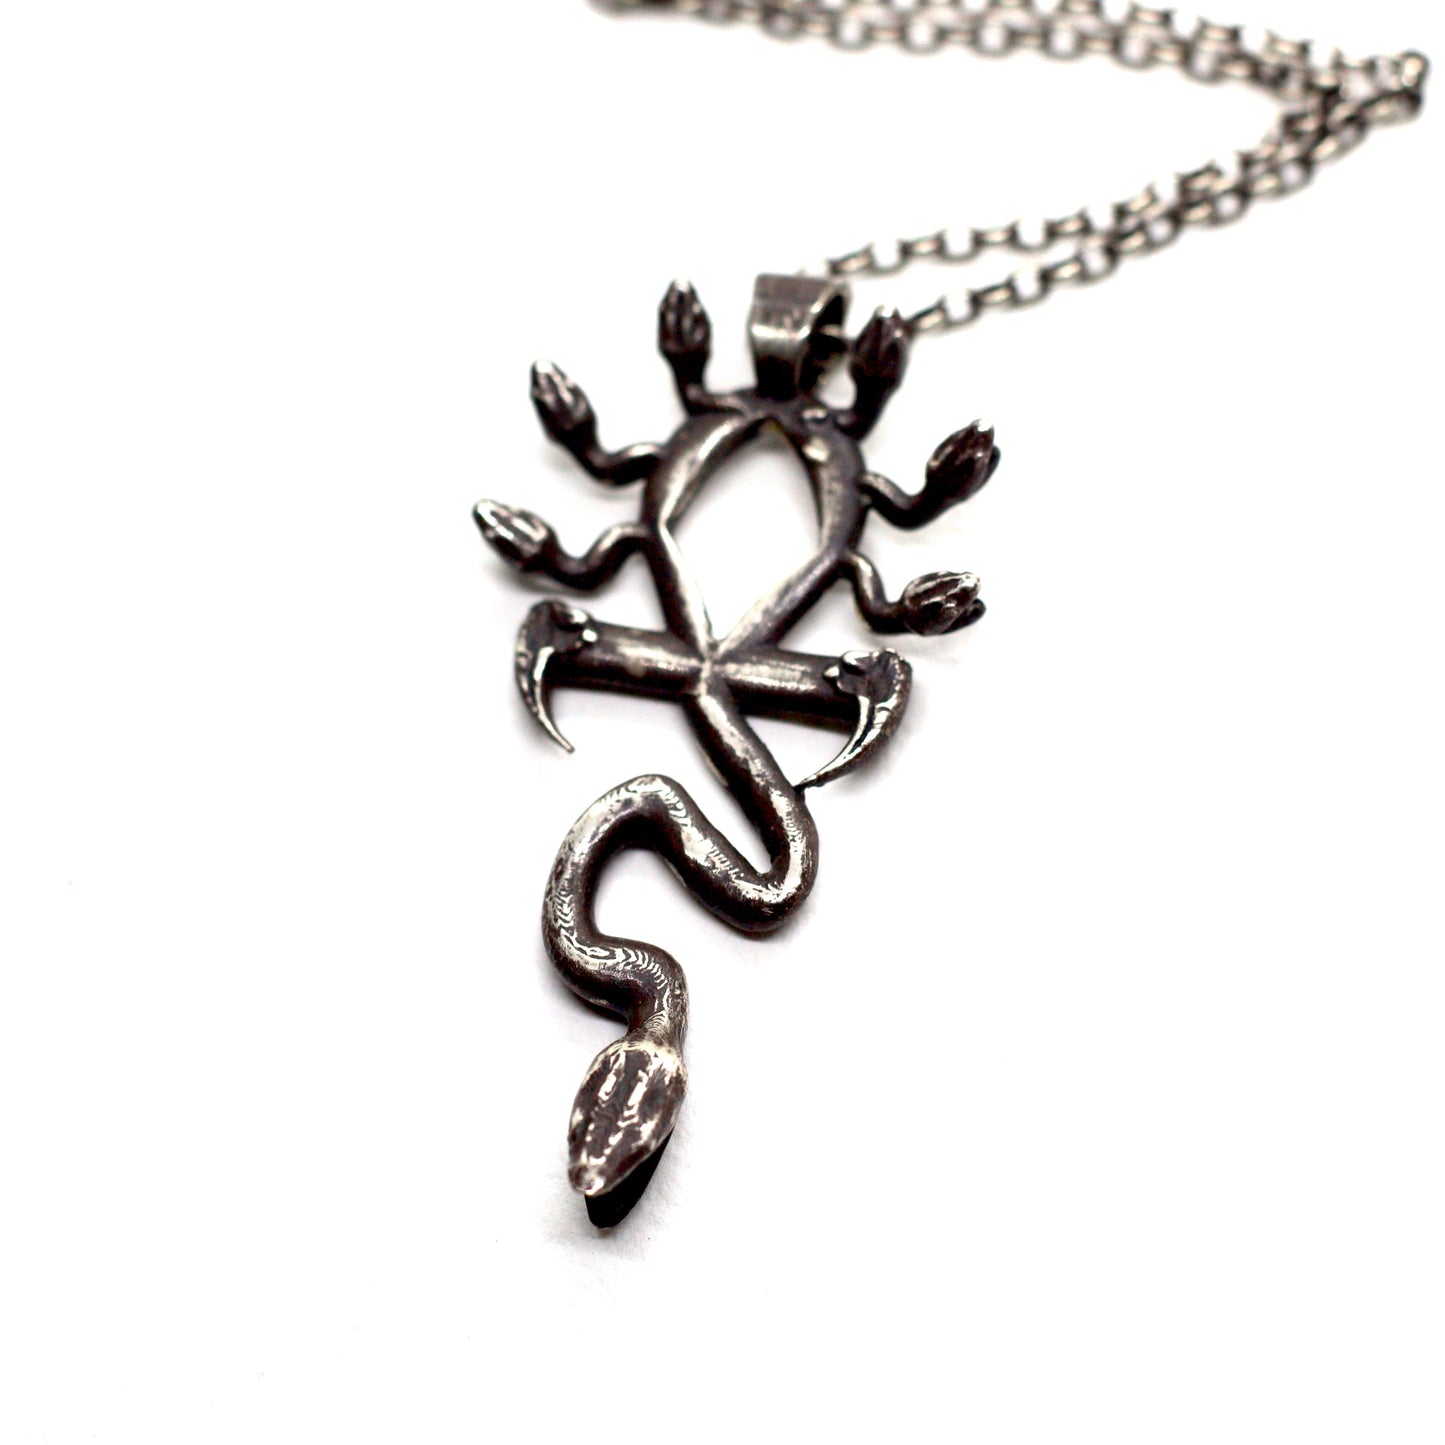 Medusa Ankh Necklace in Sterling Silver